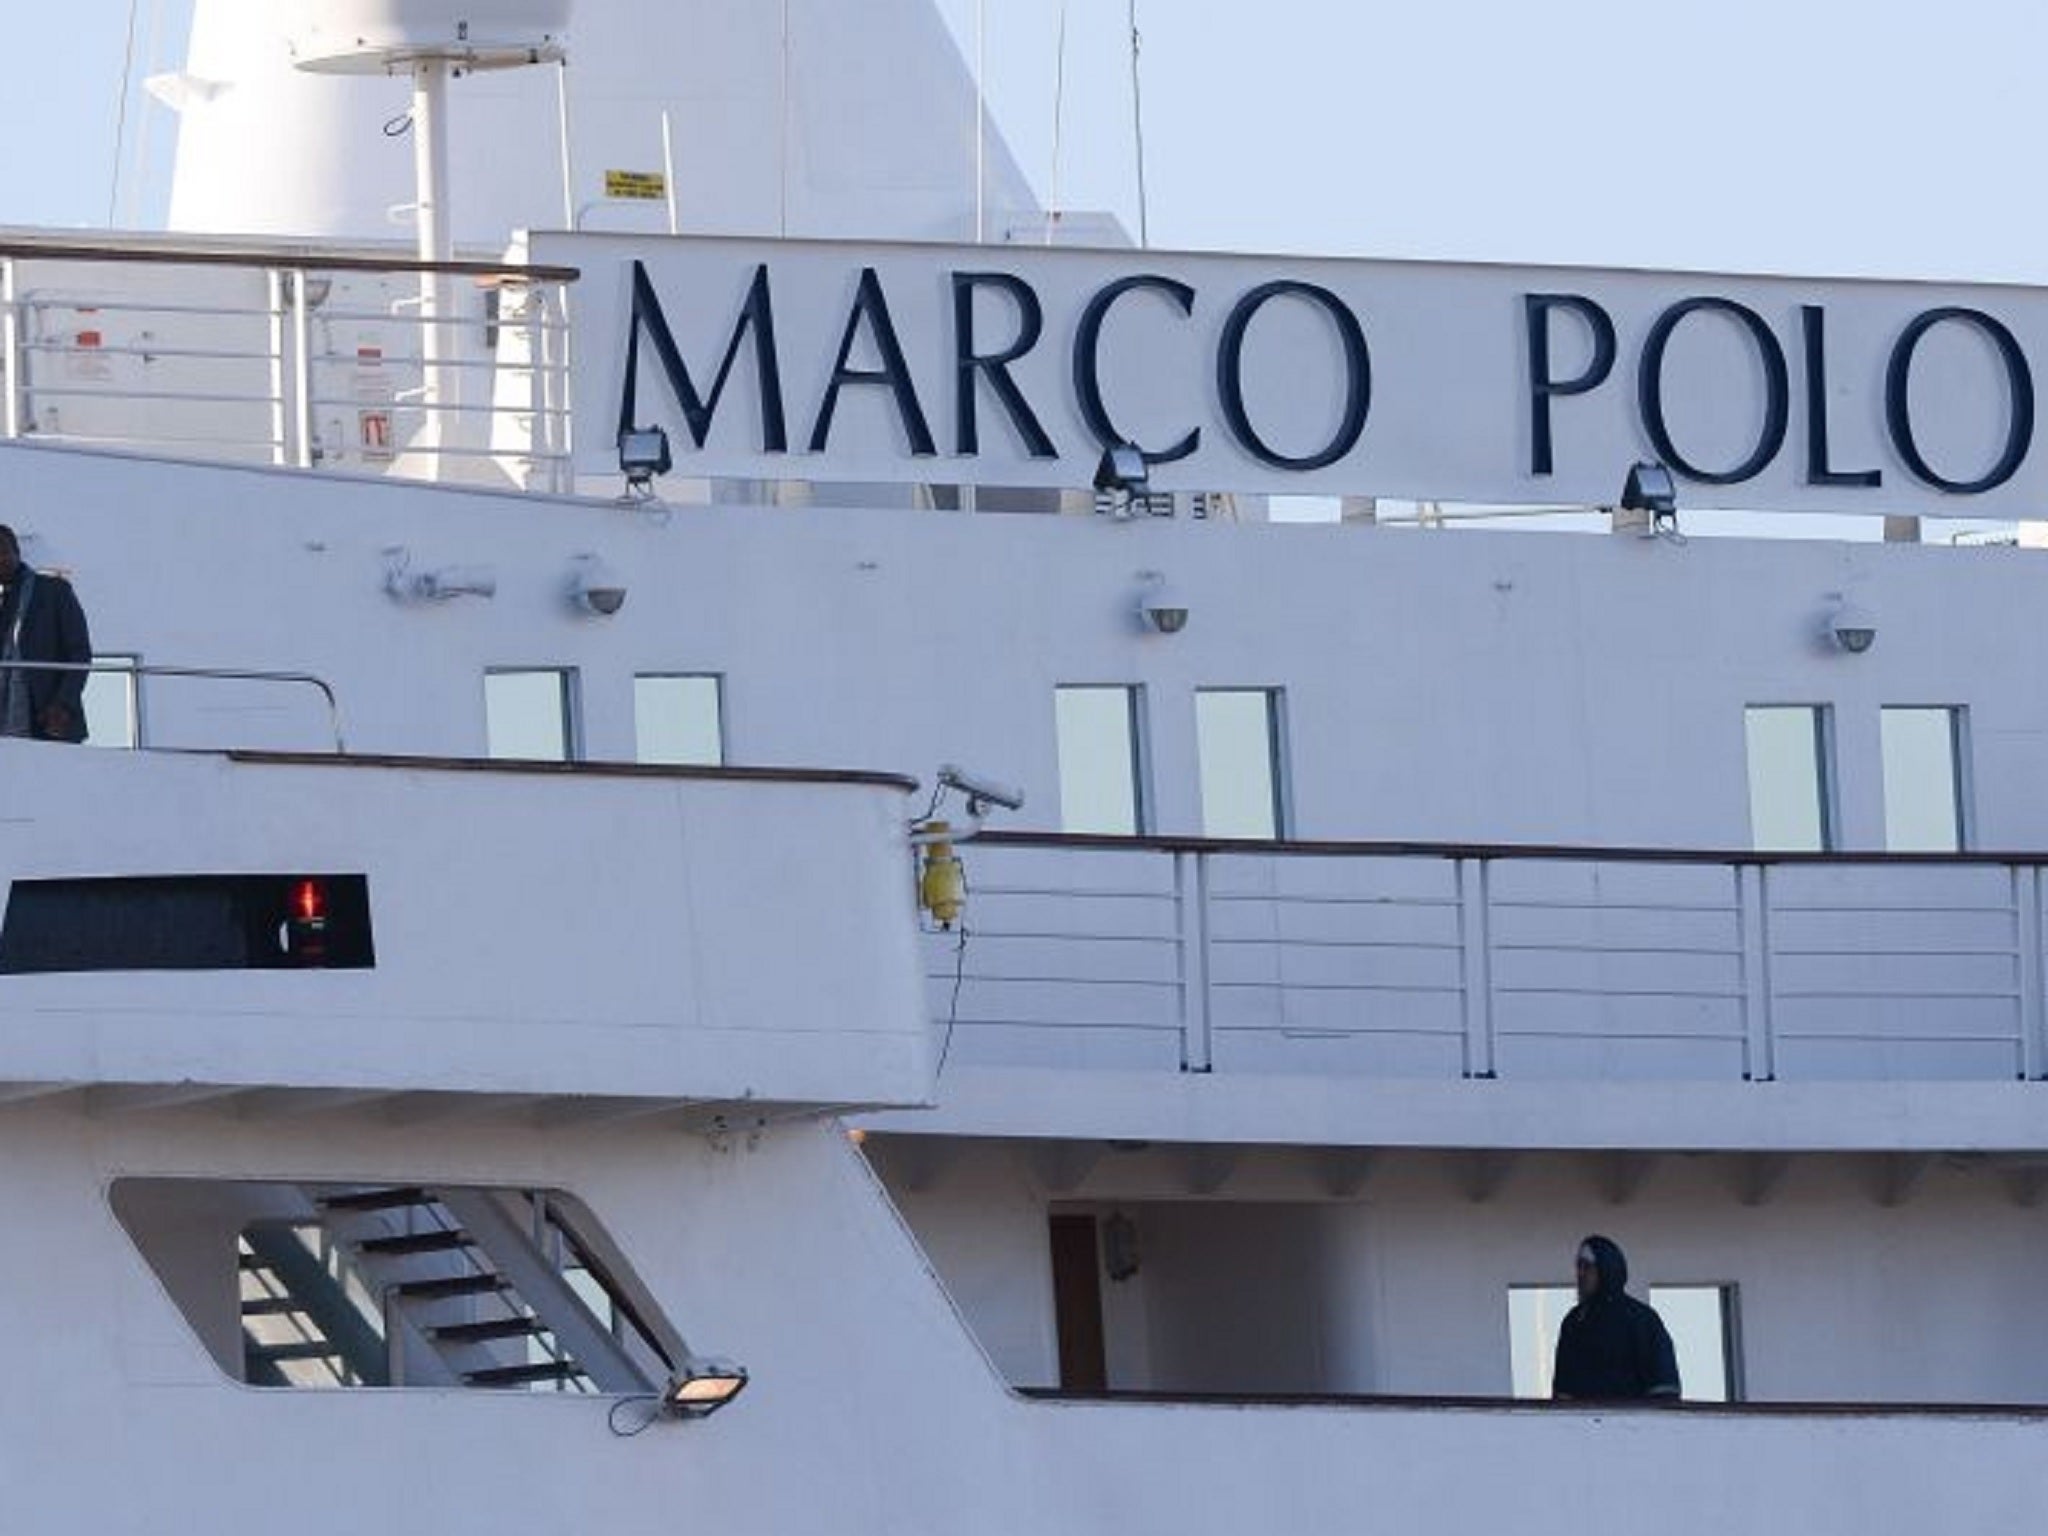 The Marco Polo ship where the window fell and killed a 85-year-old man on impact on 14 February 2014